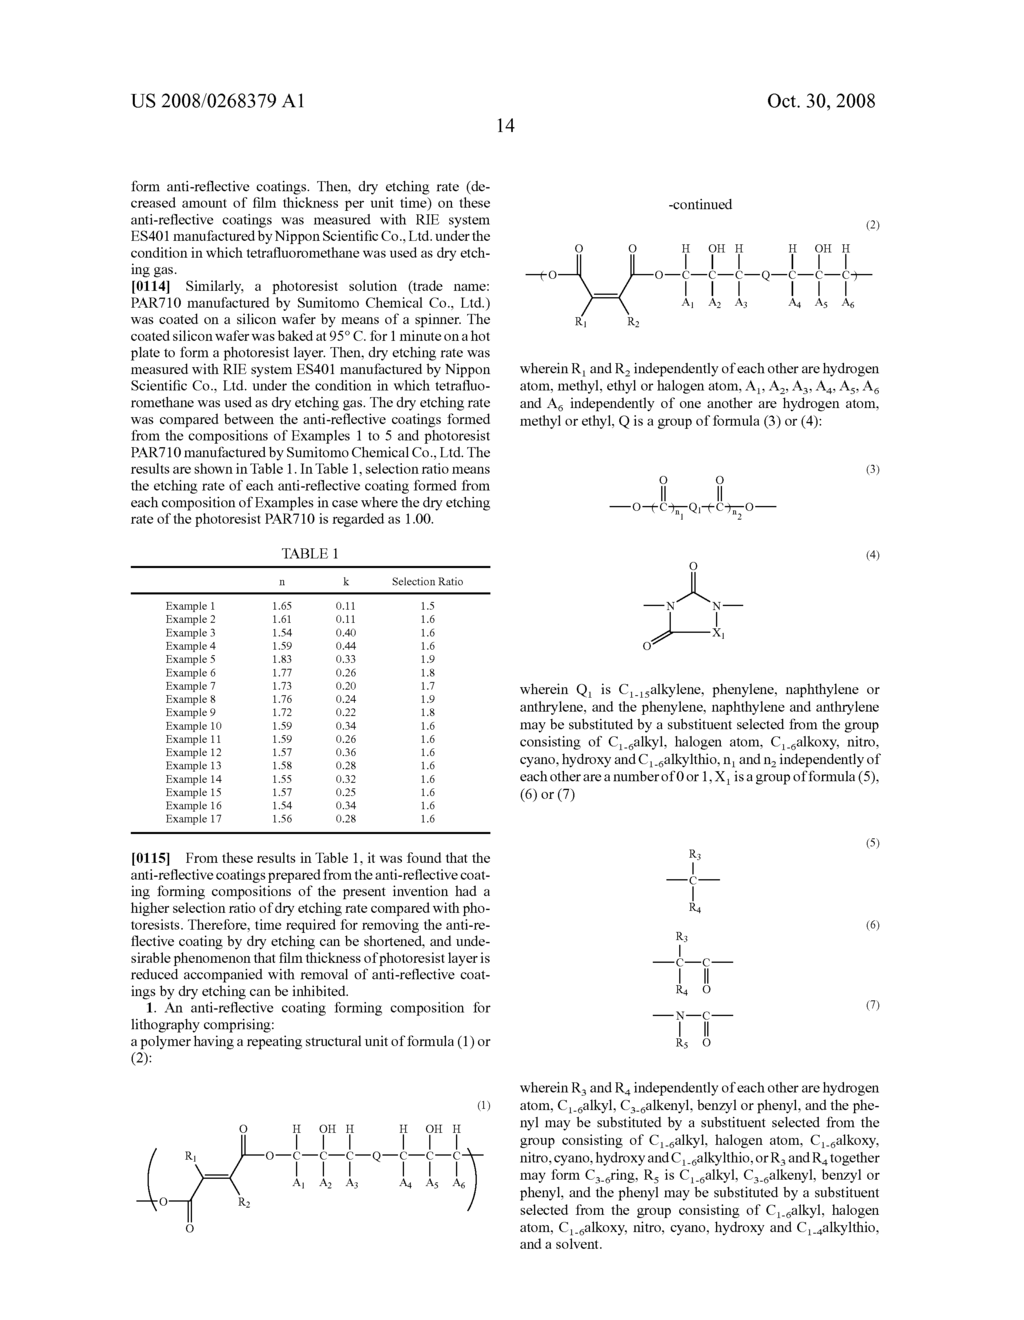 Anti-Reflective Coating Forming Composition For Lithography Containing Polymer Having Ethylenedicarbonyl Structure - diagram, schematic, and image 15